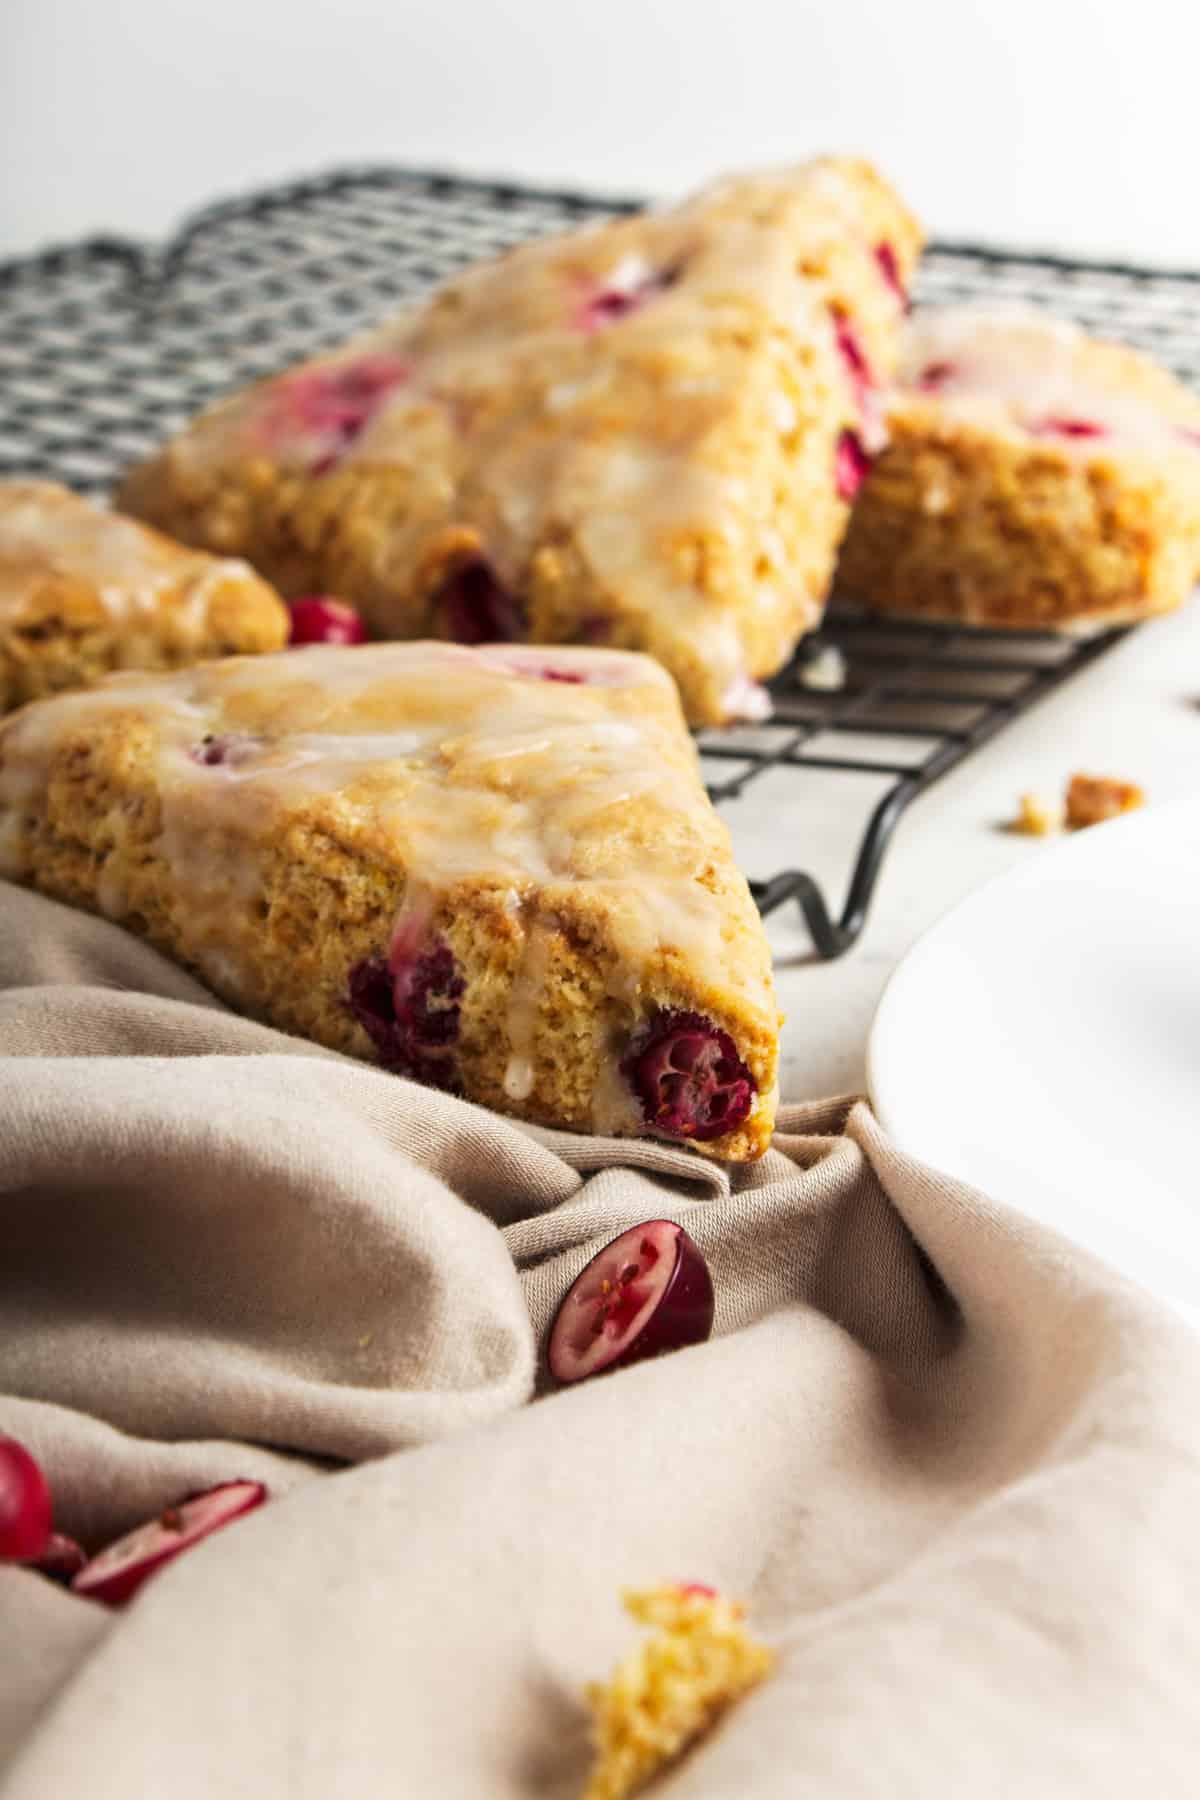 Cranberry orange scones with icing on a wire rack.